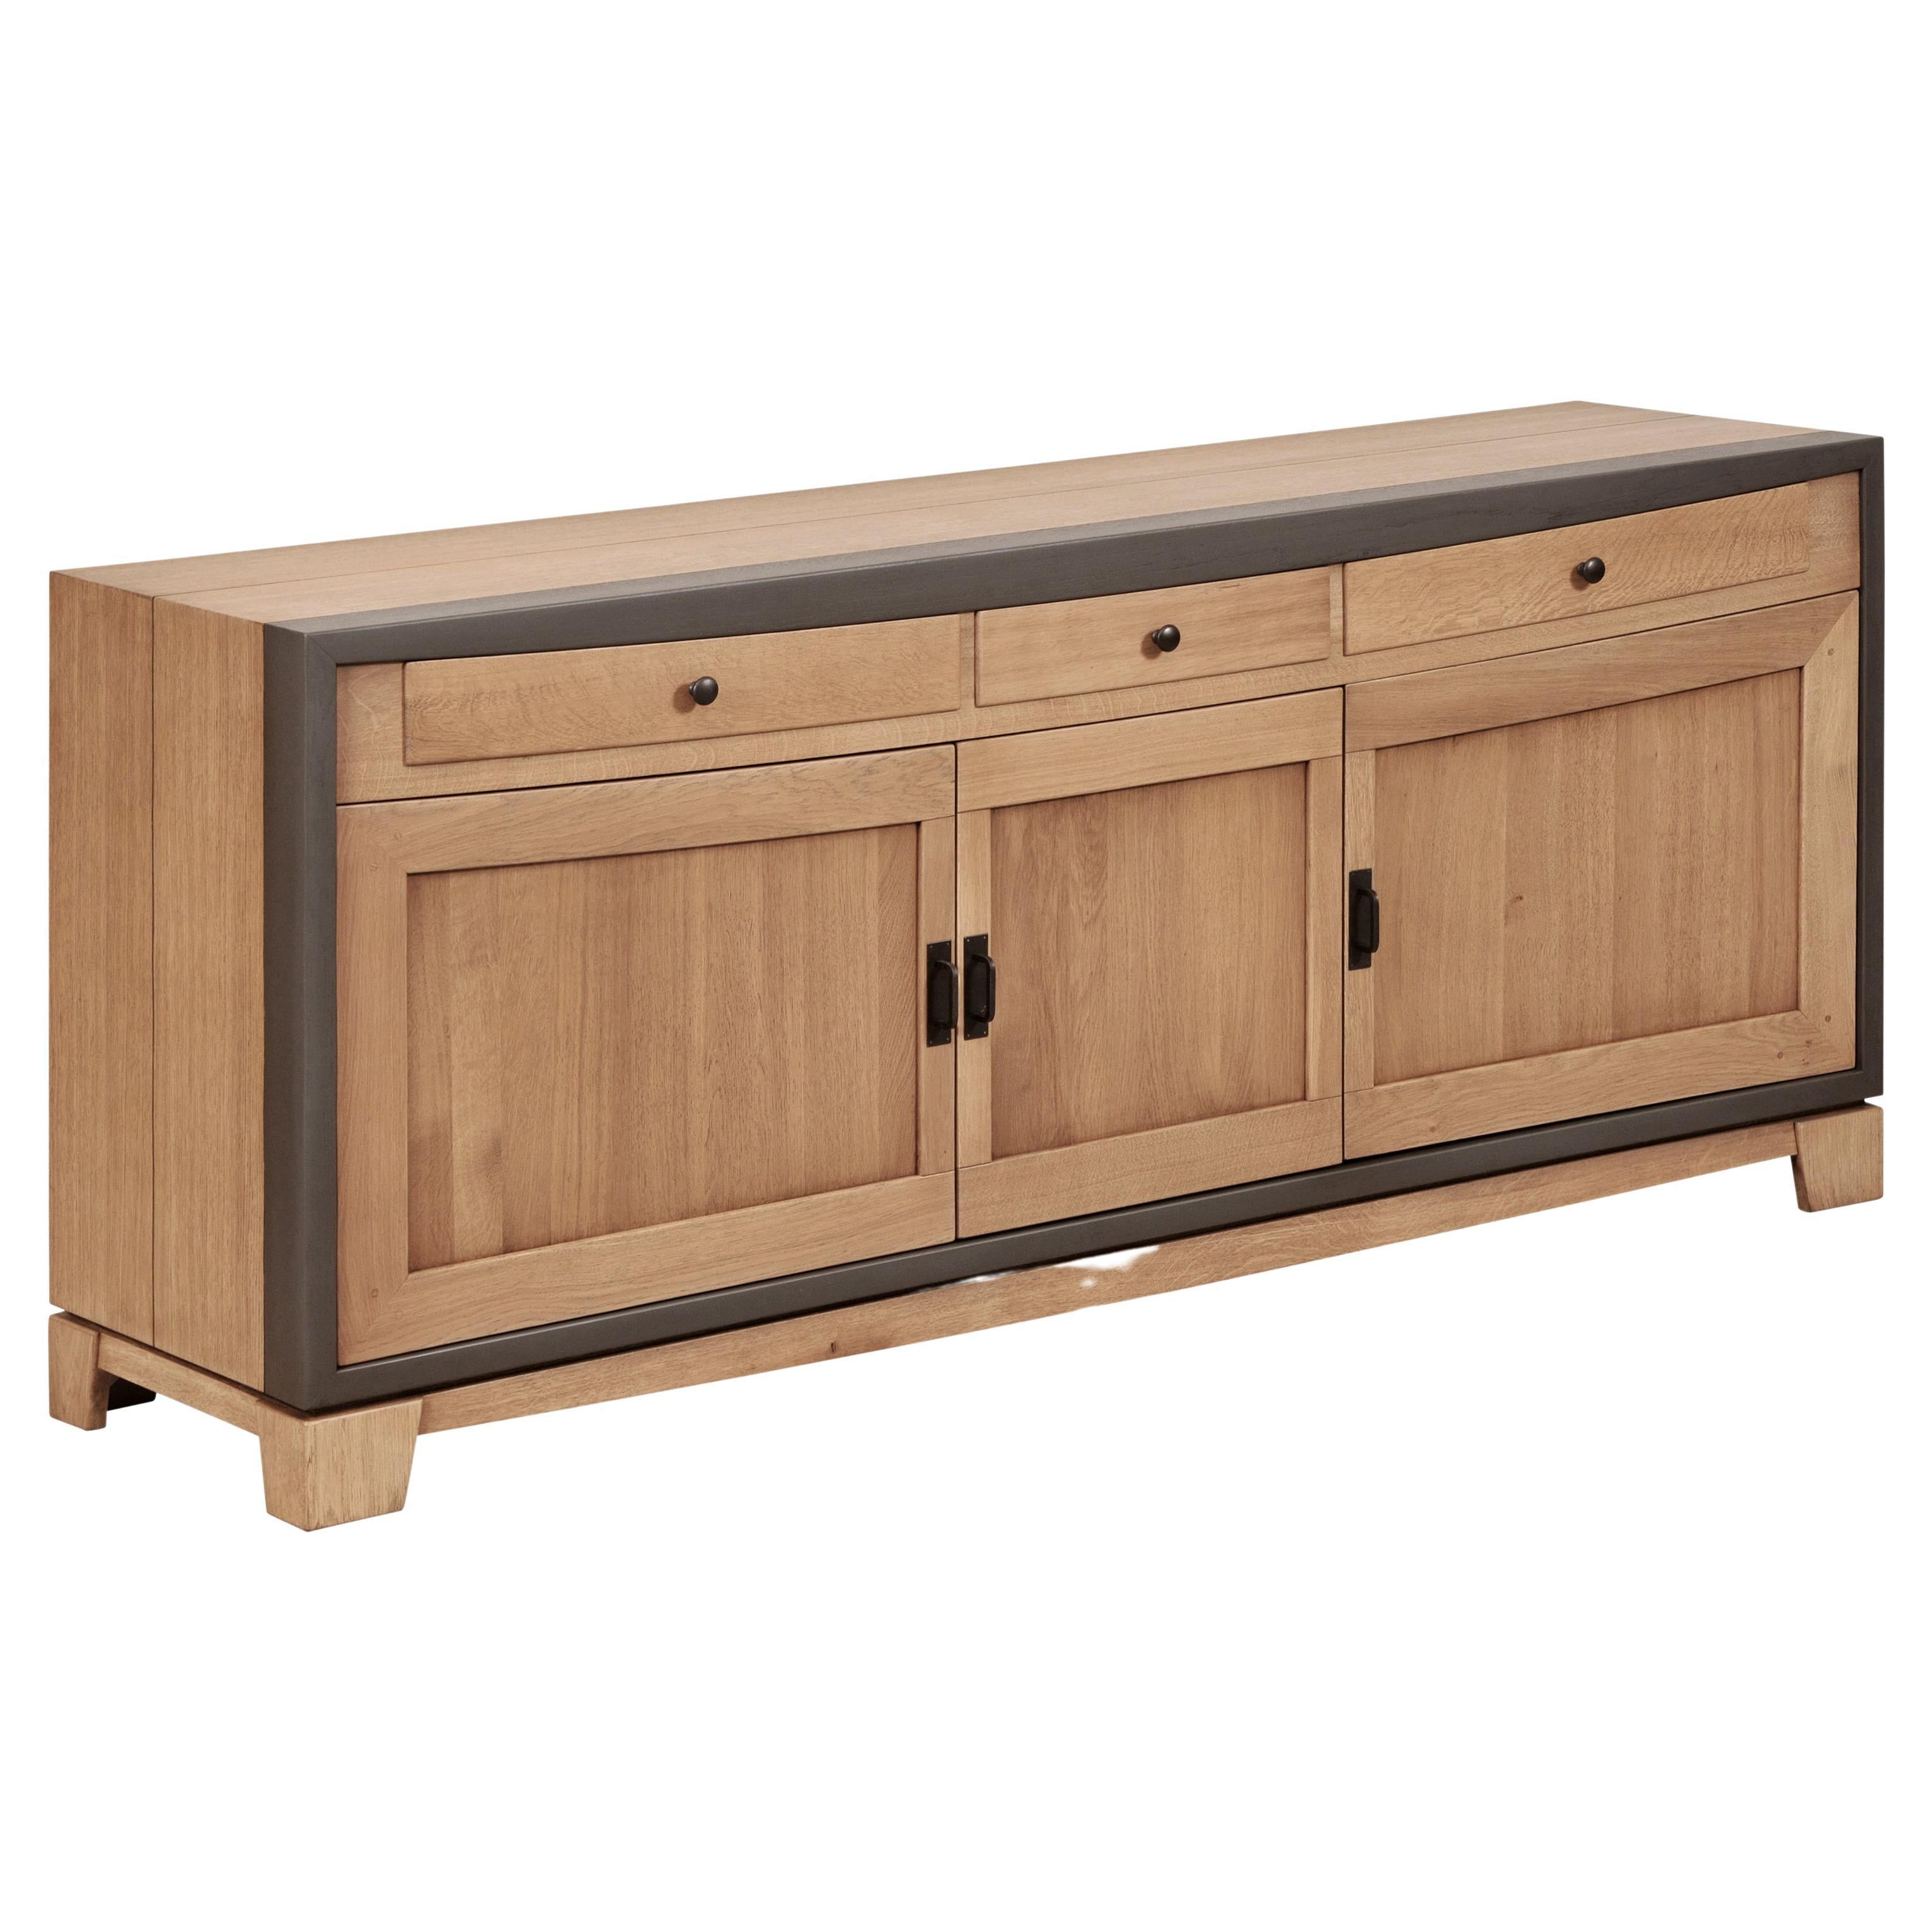 3 Doors Contemporary Sideboard in Oak, 100% Made in France